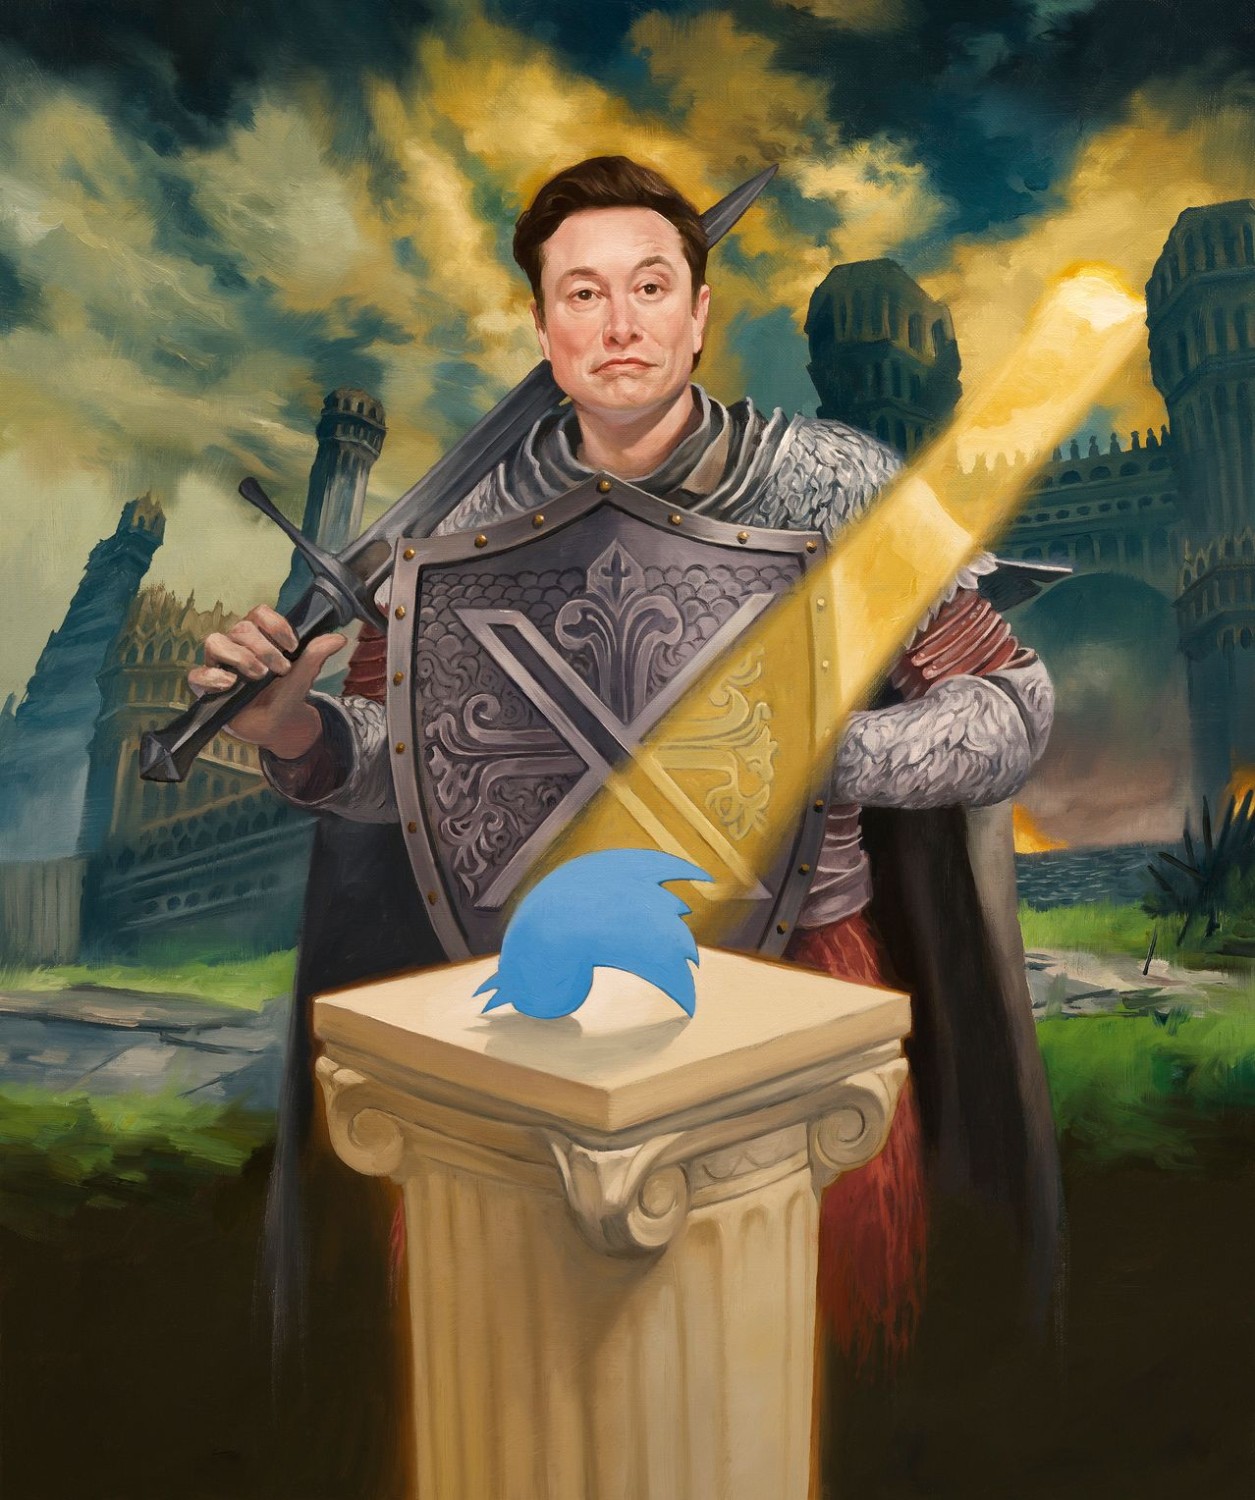 Elon Musk as a character in the video game ‘Elden Ring.’ ILLUSTRATION BY ROBERTO PARADA